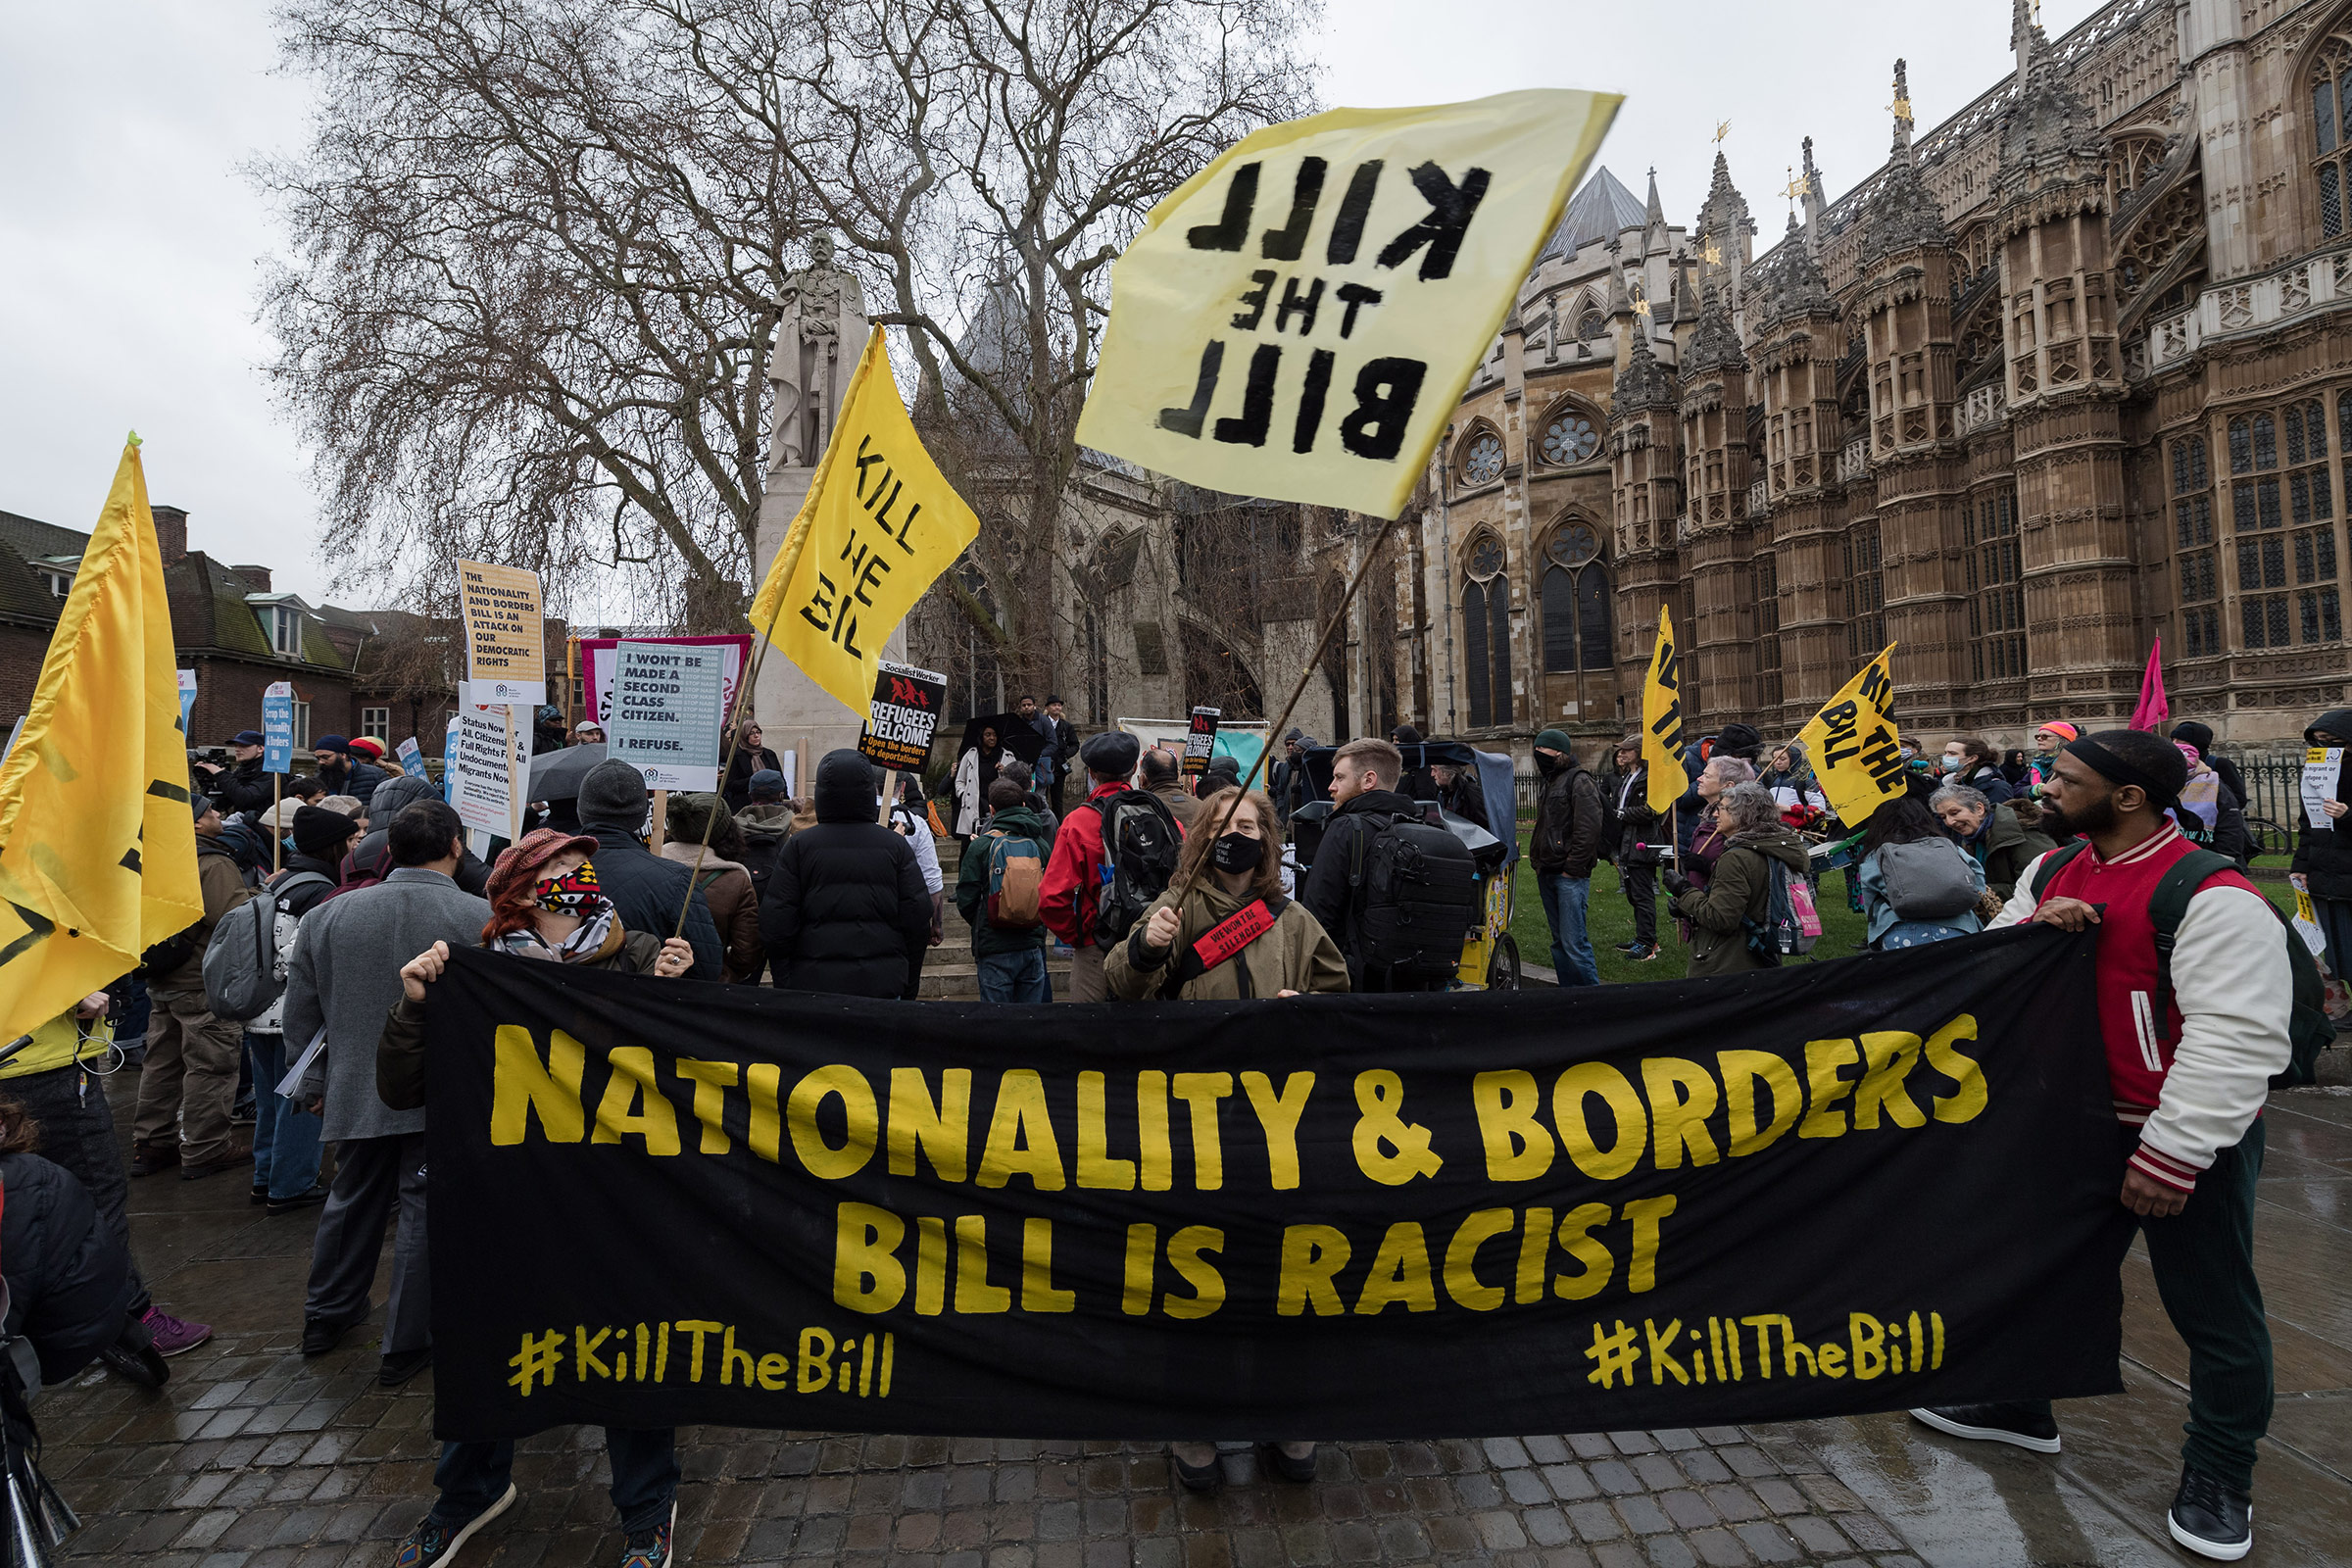 Activists stage a protest outside Houses of Parliament against the Nationality and Borders Bill in London on Jan. 27, 2022. (Wiktor Szymanowicz—Future Publishing/Getty Images)